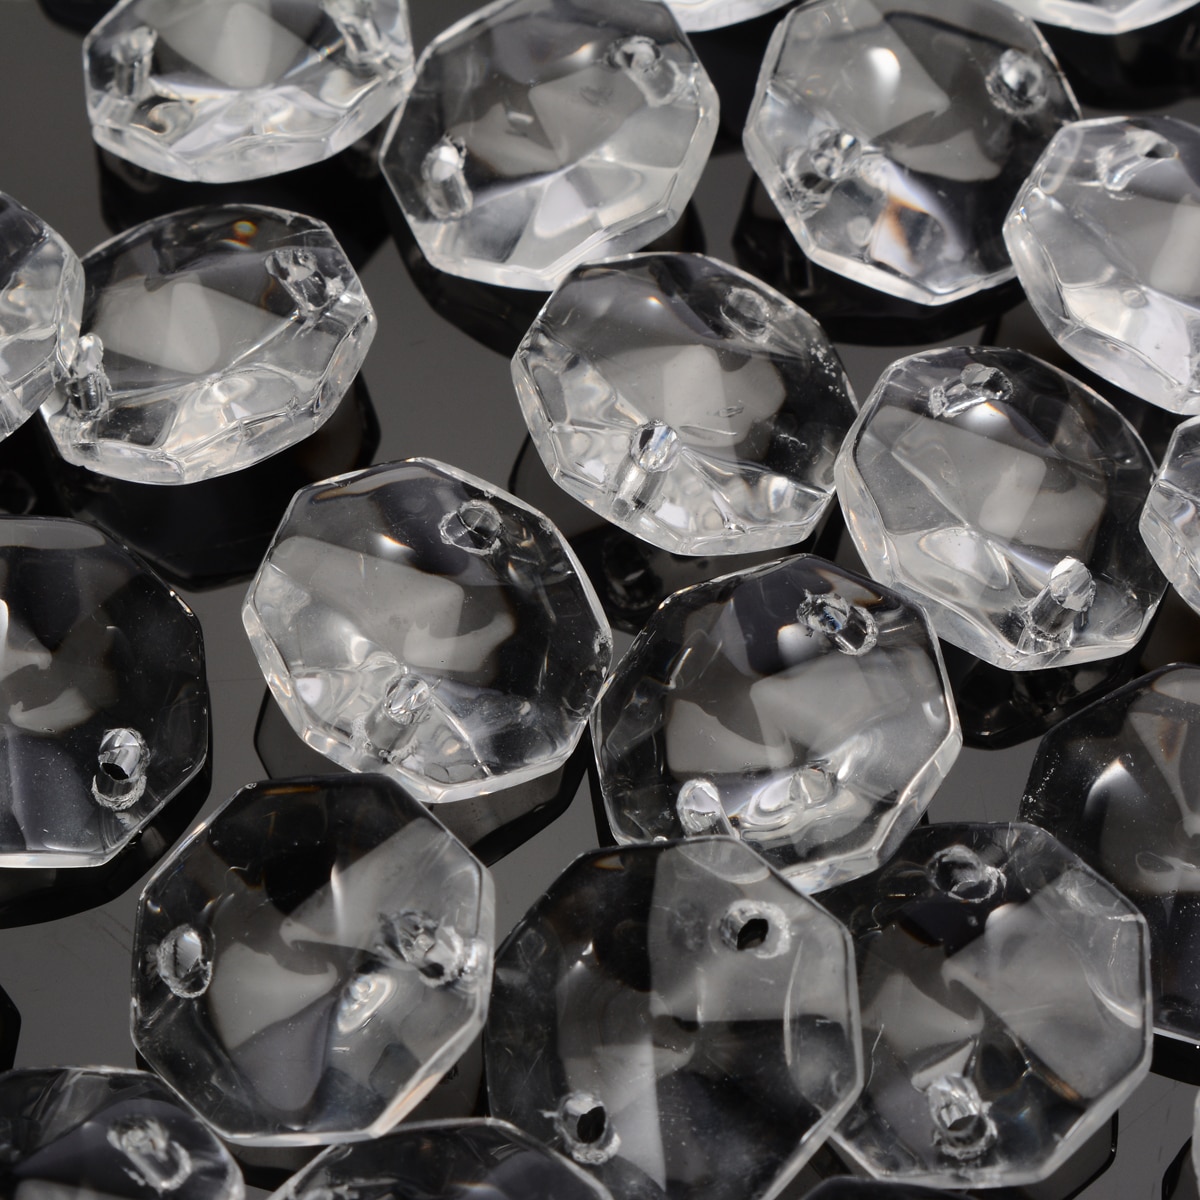 50Pcs 14mm Glass Crystal Prisms Clear Octagonal Beads Glass Pendant Chandeliers for Lamp Light Decorations